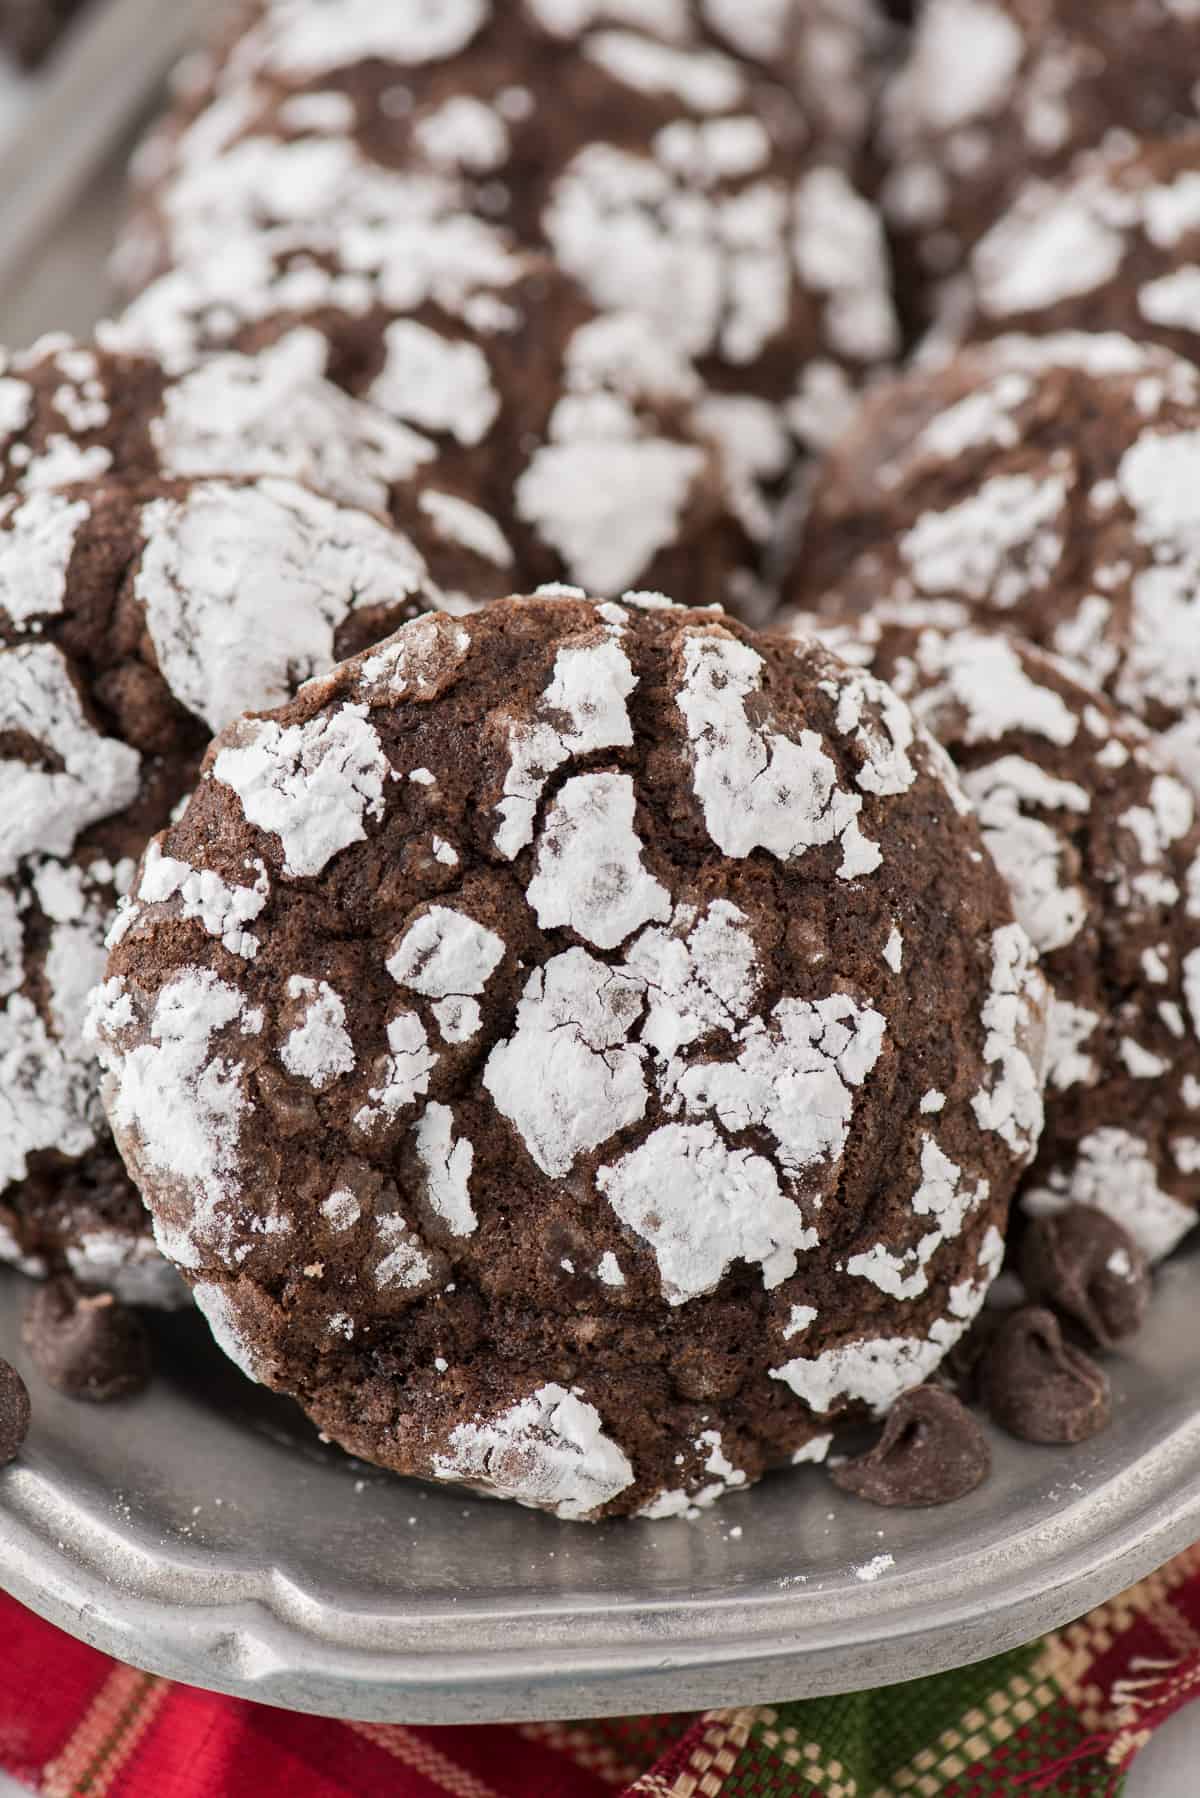 chocolate crinkle cookies rolled in powdered sugar on metal tray with red towel underneath